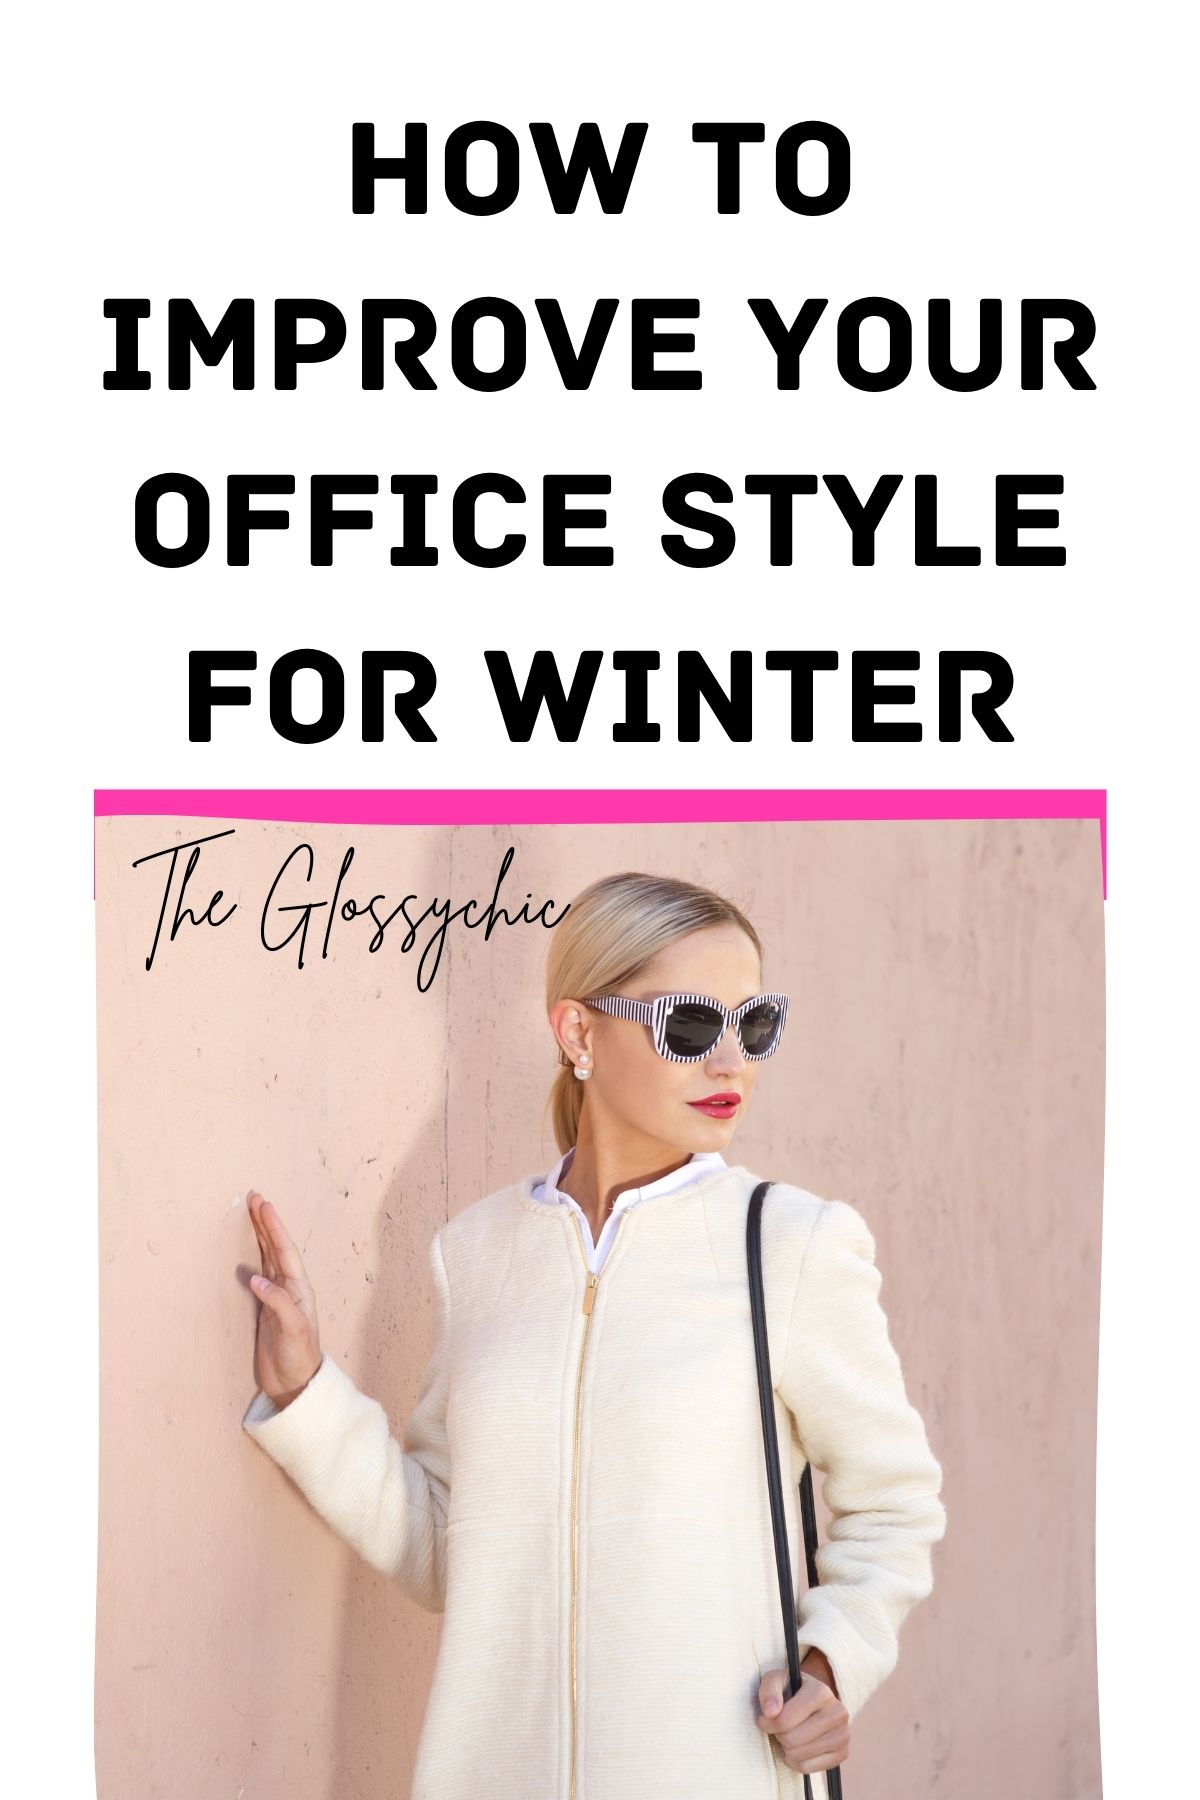 How To Improve Your Office Style For Winter